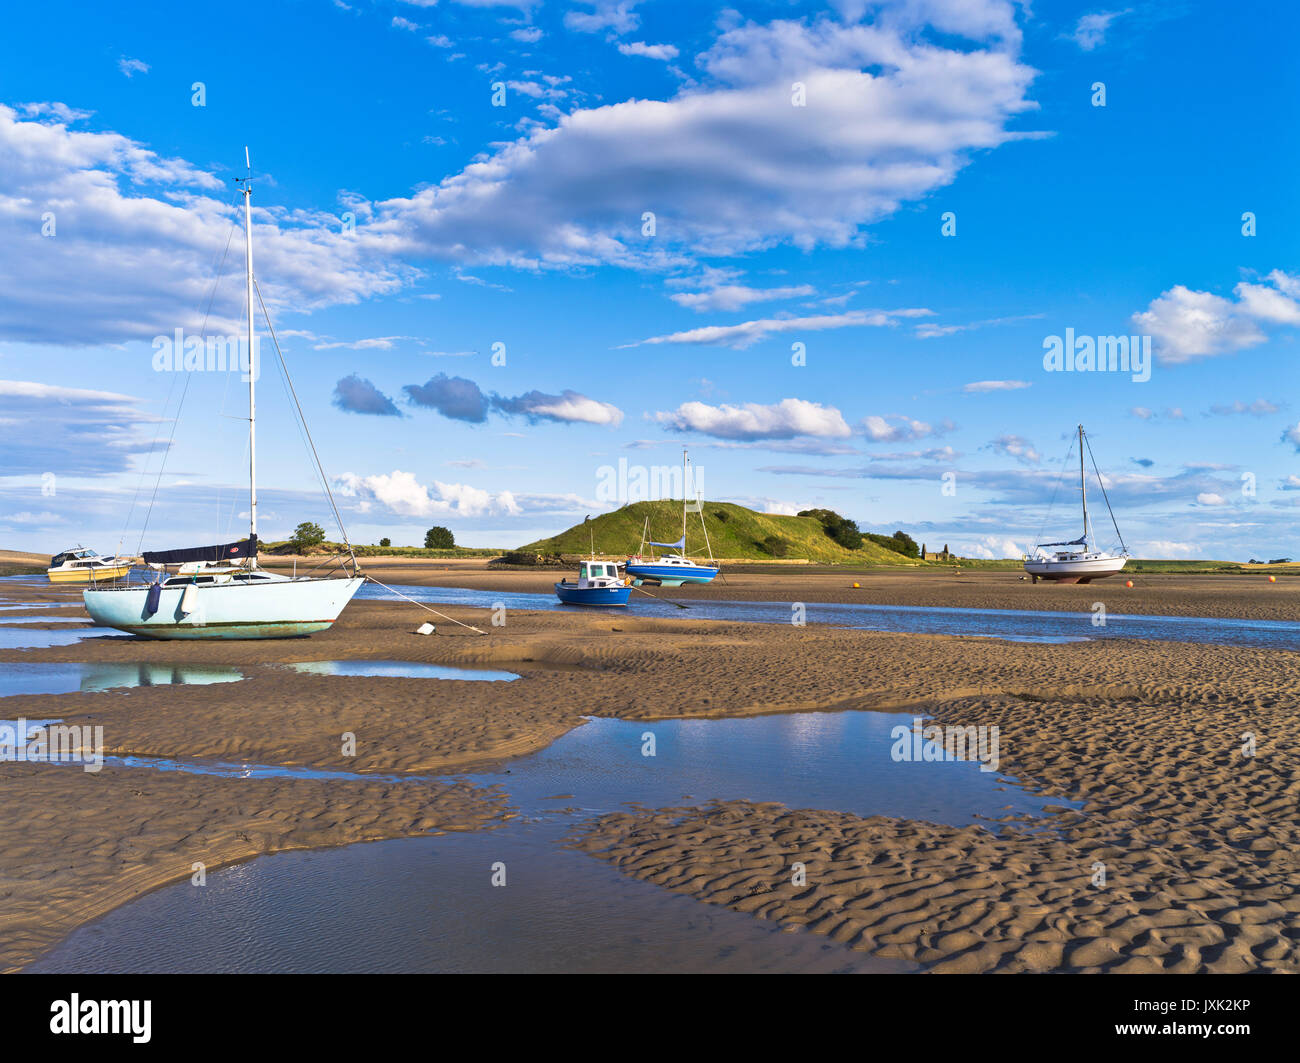 dh Northumbria Anchorage England ALNMOUTH BAY NORTHUMBERLAND Boat Yachts boat summer evening at Anchor Yacht Coast ebb britain in Harbour Heritage uk Stockfoto